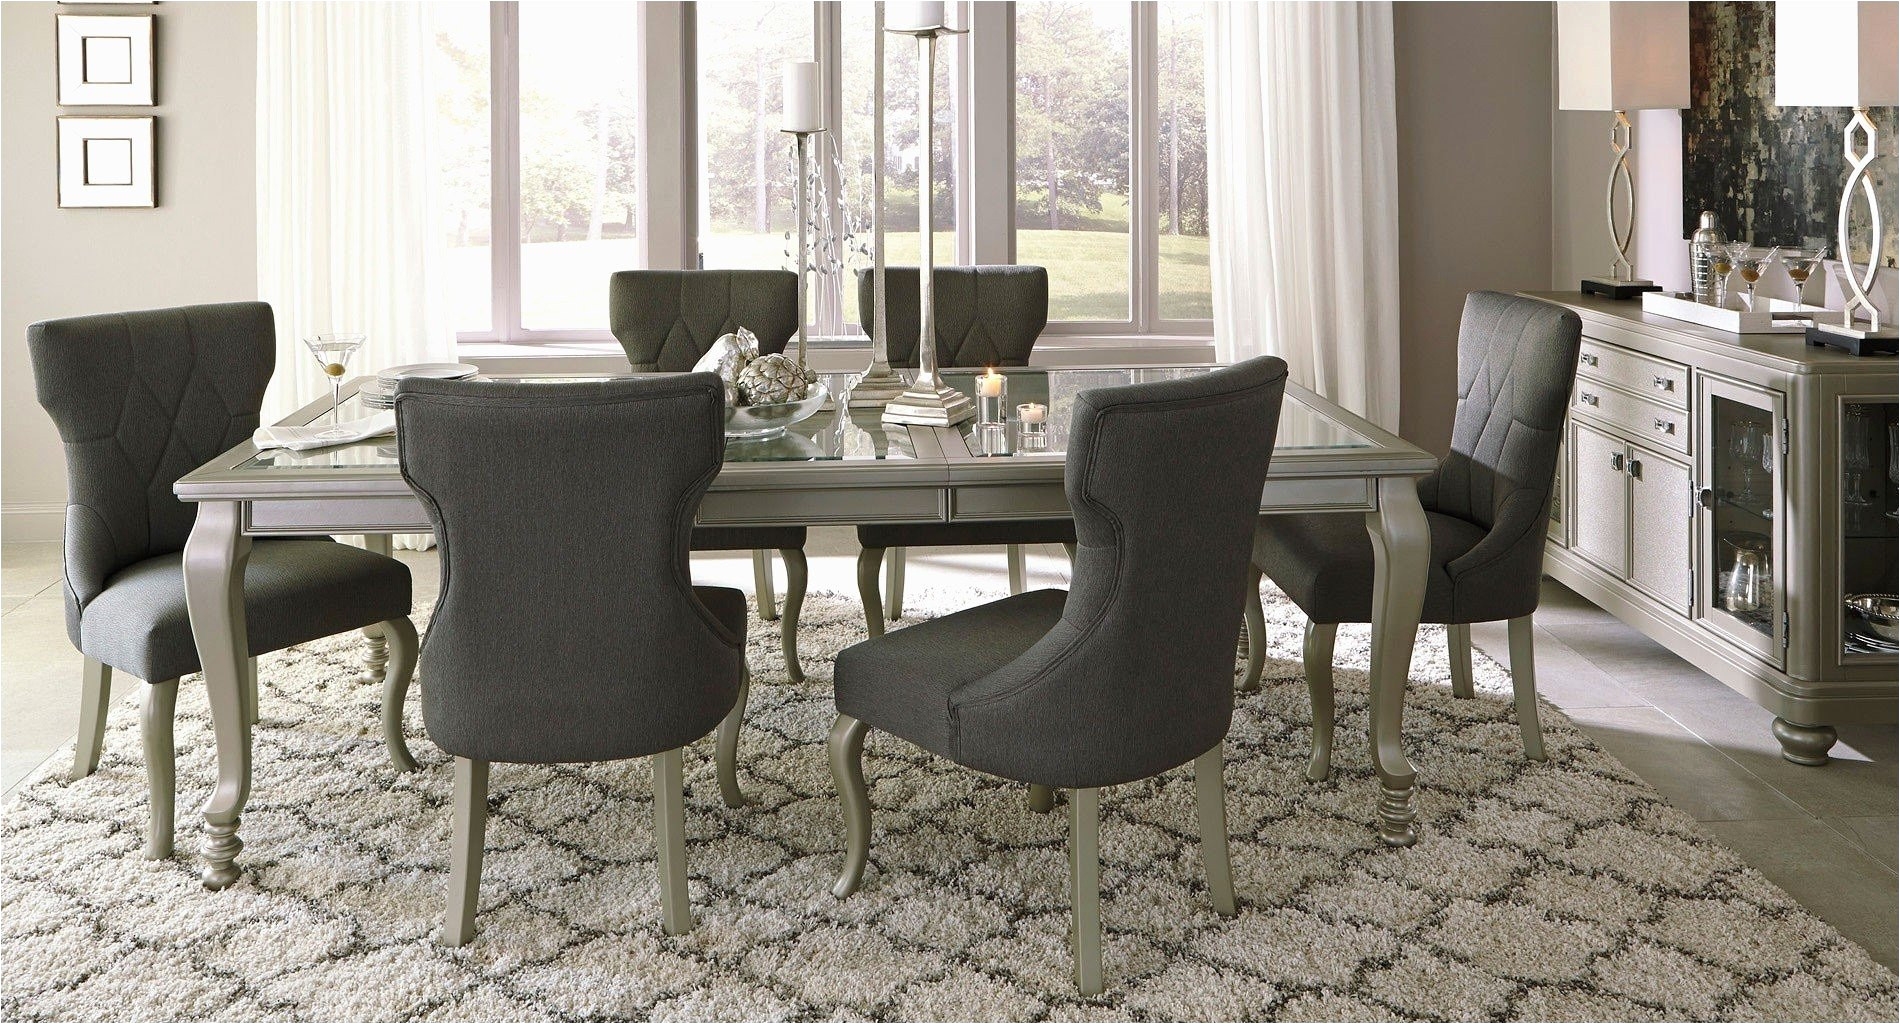 Dining Room Sets for Sale Brilliant Shaker Chairs 0d Archives Design Throughout Modern Living Room Furniture